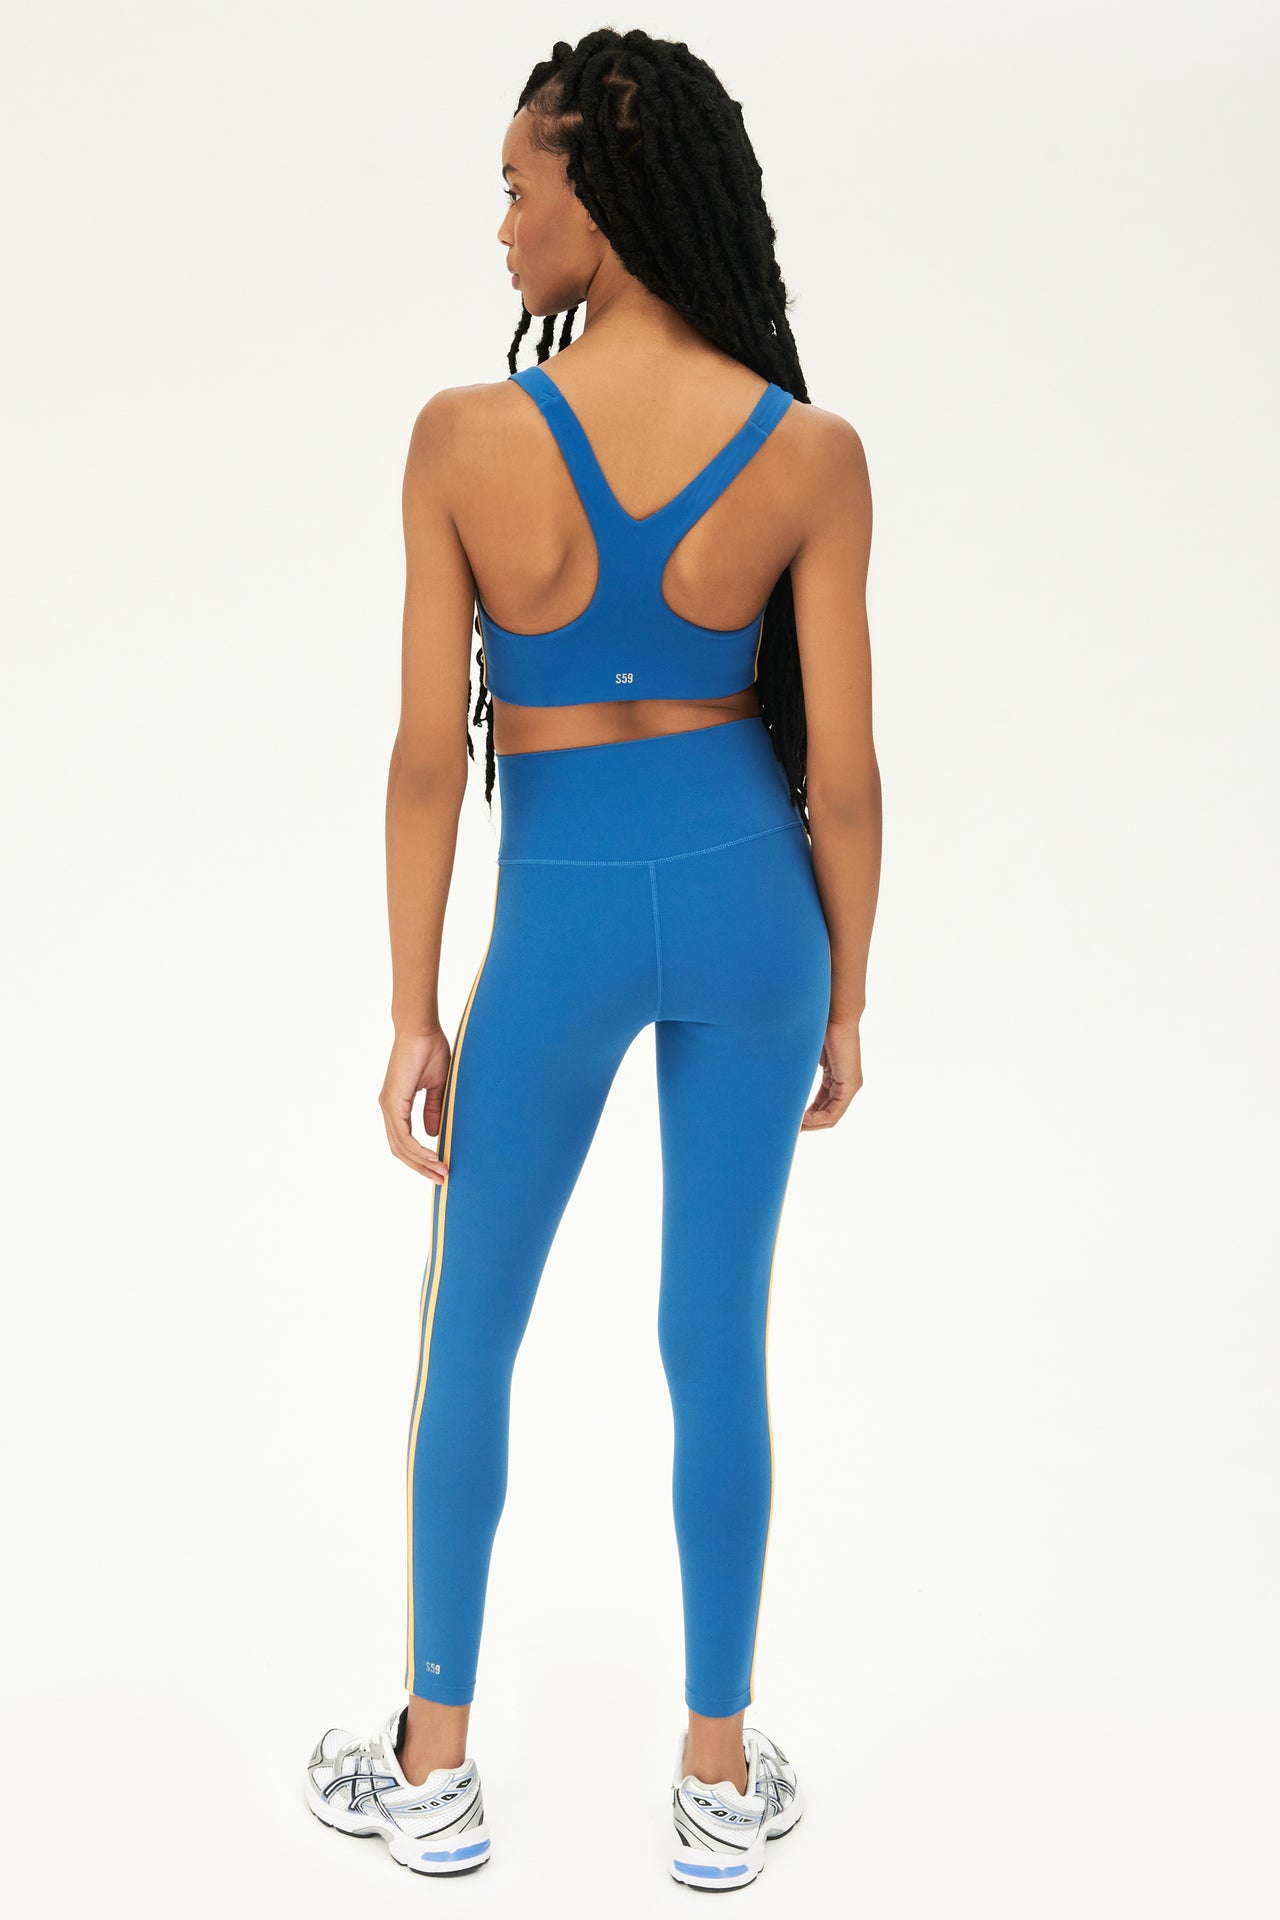 Full back view of girl wearing blue sports bra with two thin yellow stripes down the side and blue leggings with white shoes